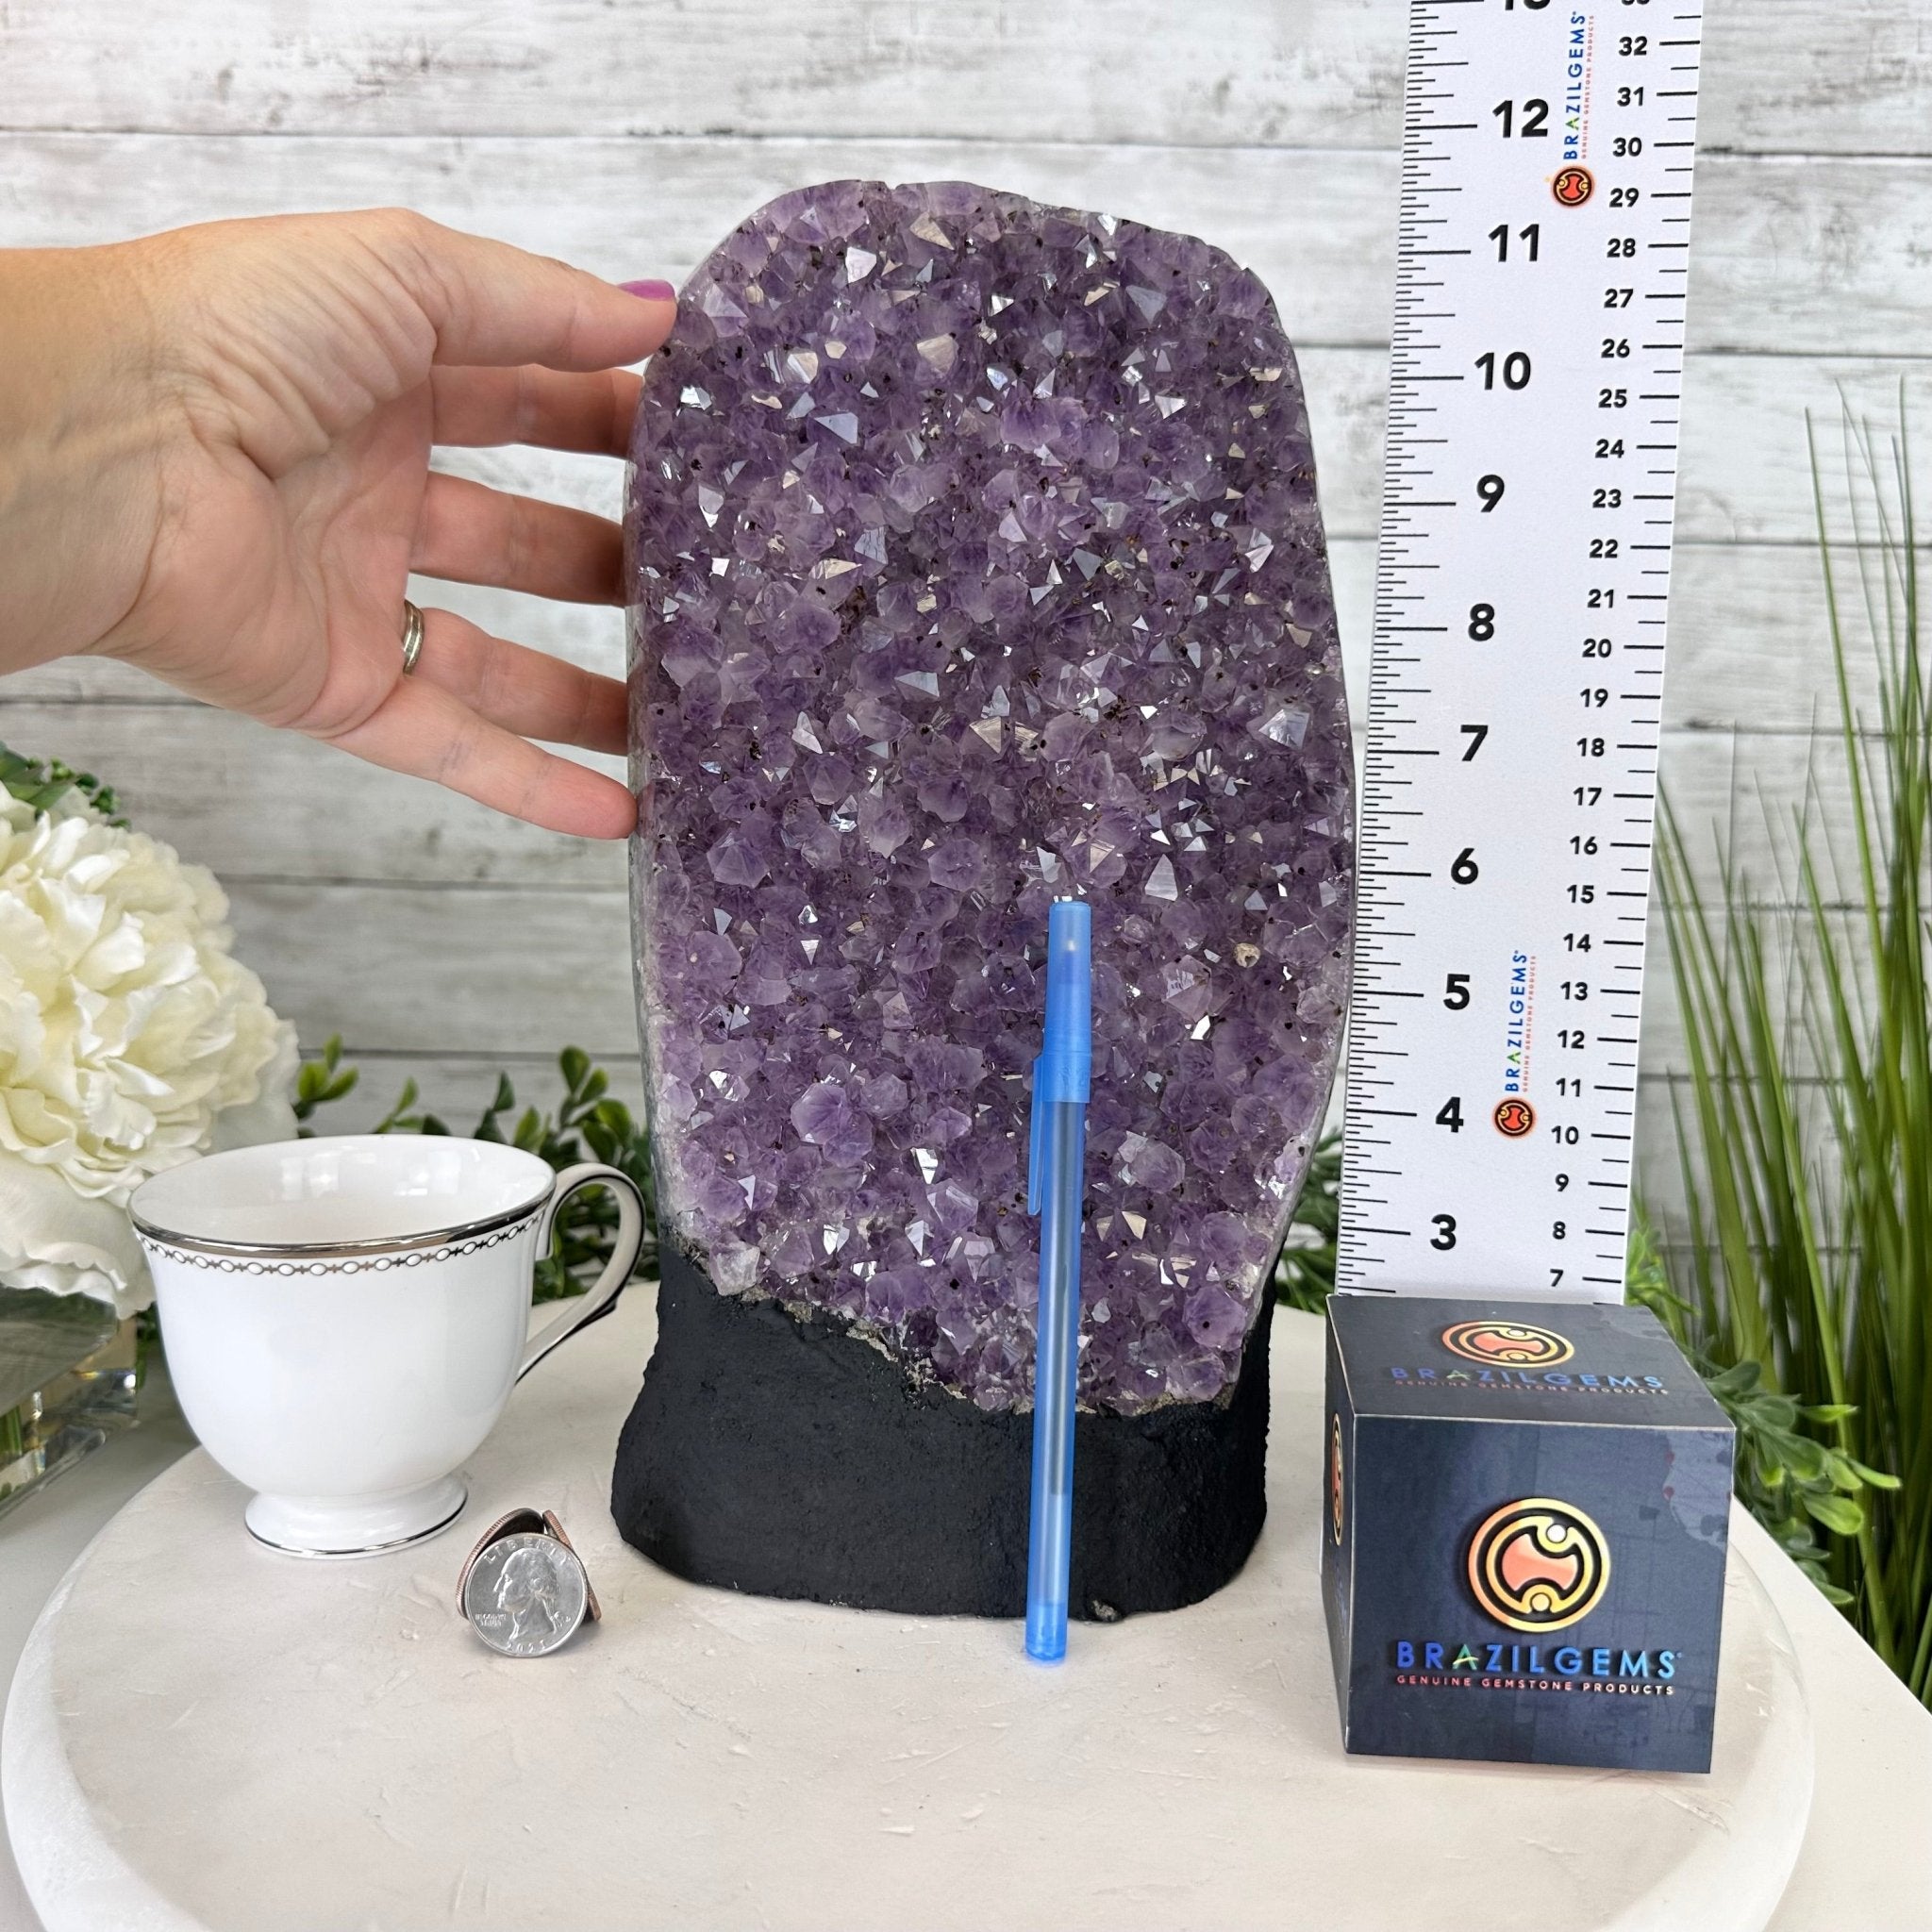 Extra Quality Amethyst Cluster, Cement Base, 11.25" Tall #5614-0109 - Brazil GemsBrazil GemsExtra Quality Amethyst Cluster, Cement Base, 11.25" Tall #5614-0109Clusters on Cement Bases5614-0109